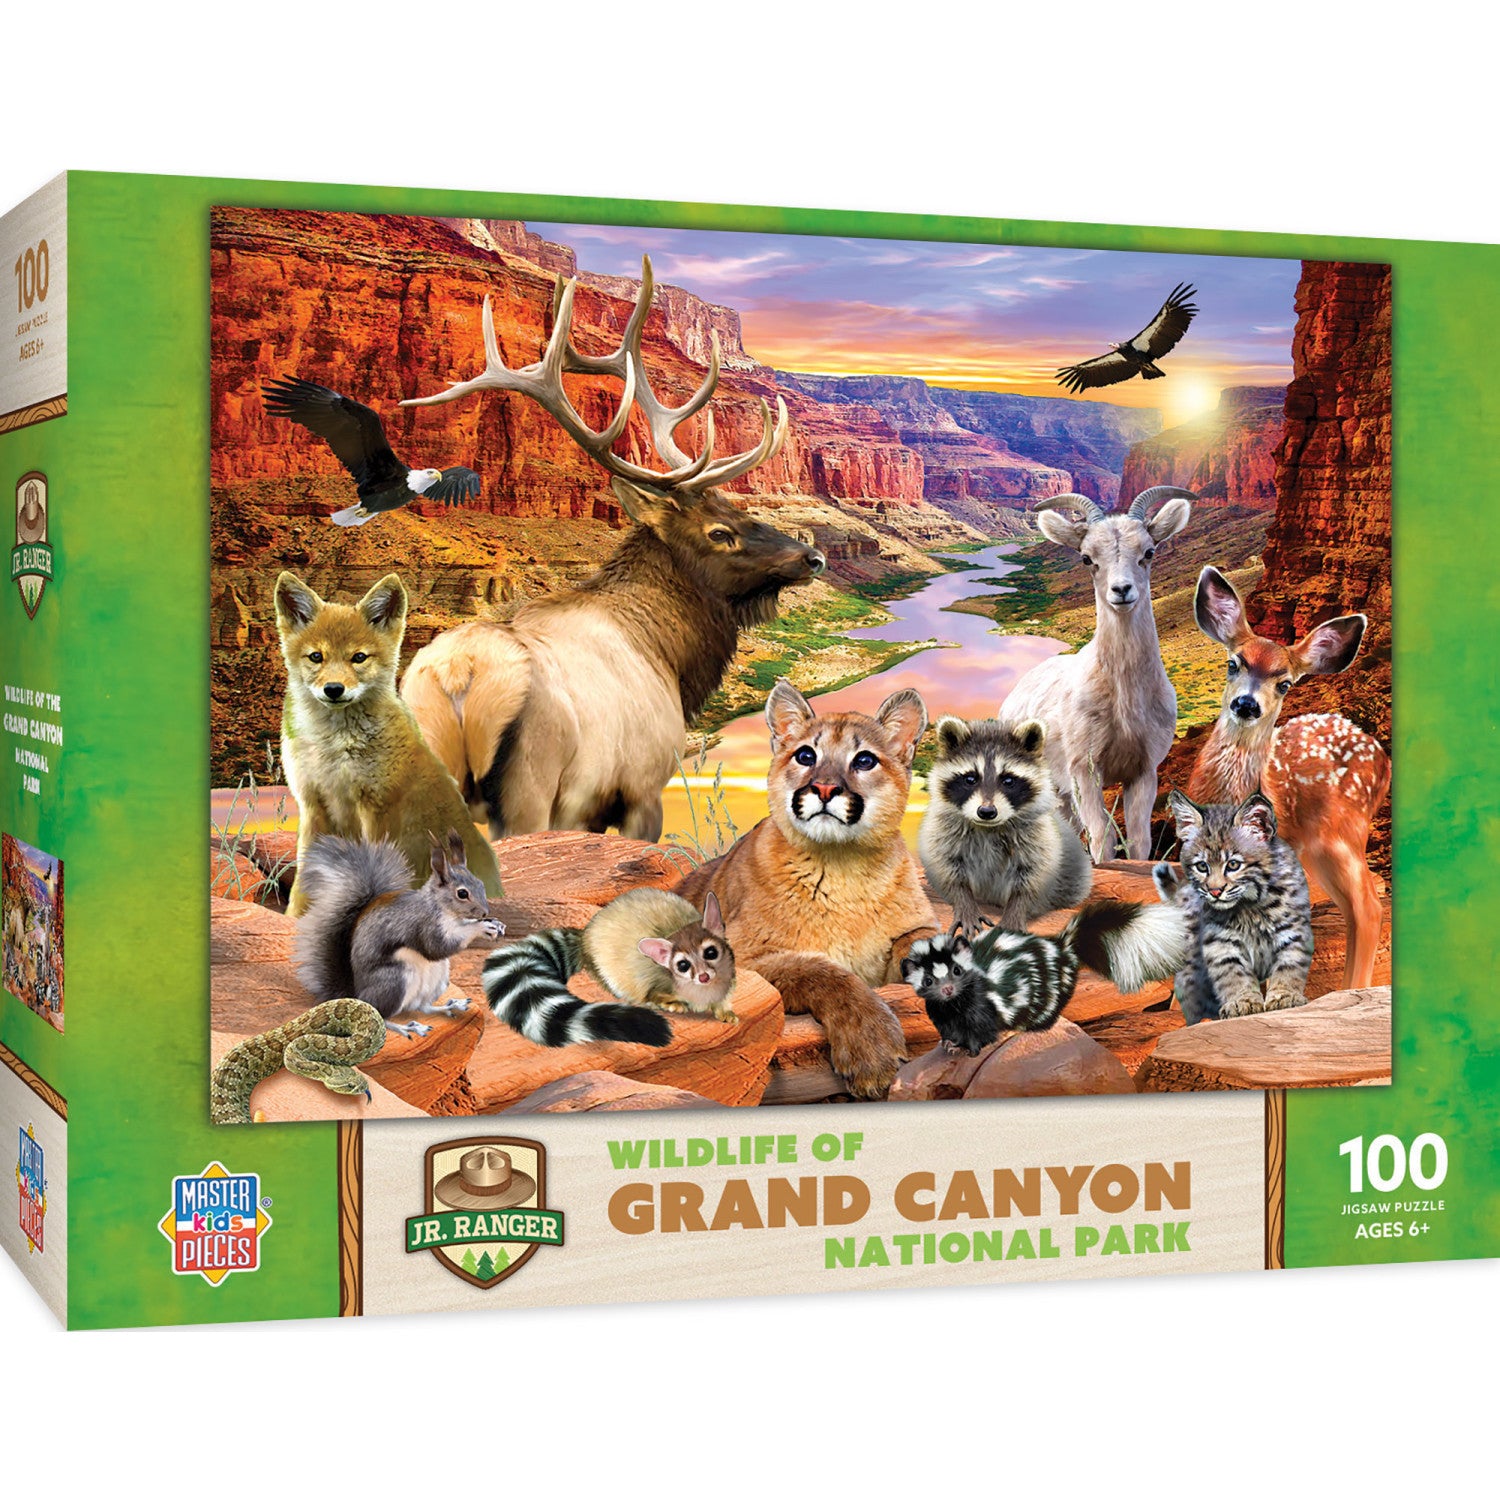 Wildlife of Grand Canyon National Park - 100 Piece Jigsaw Puzzle